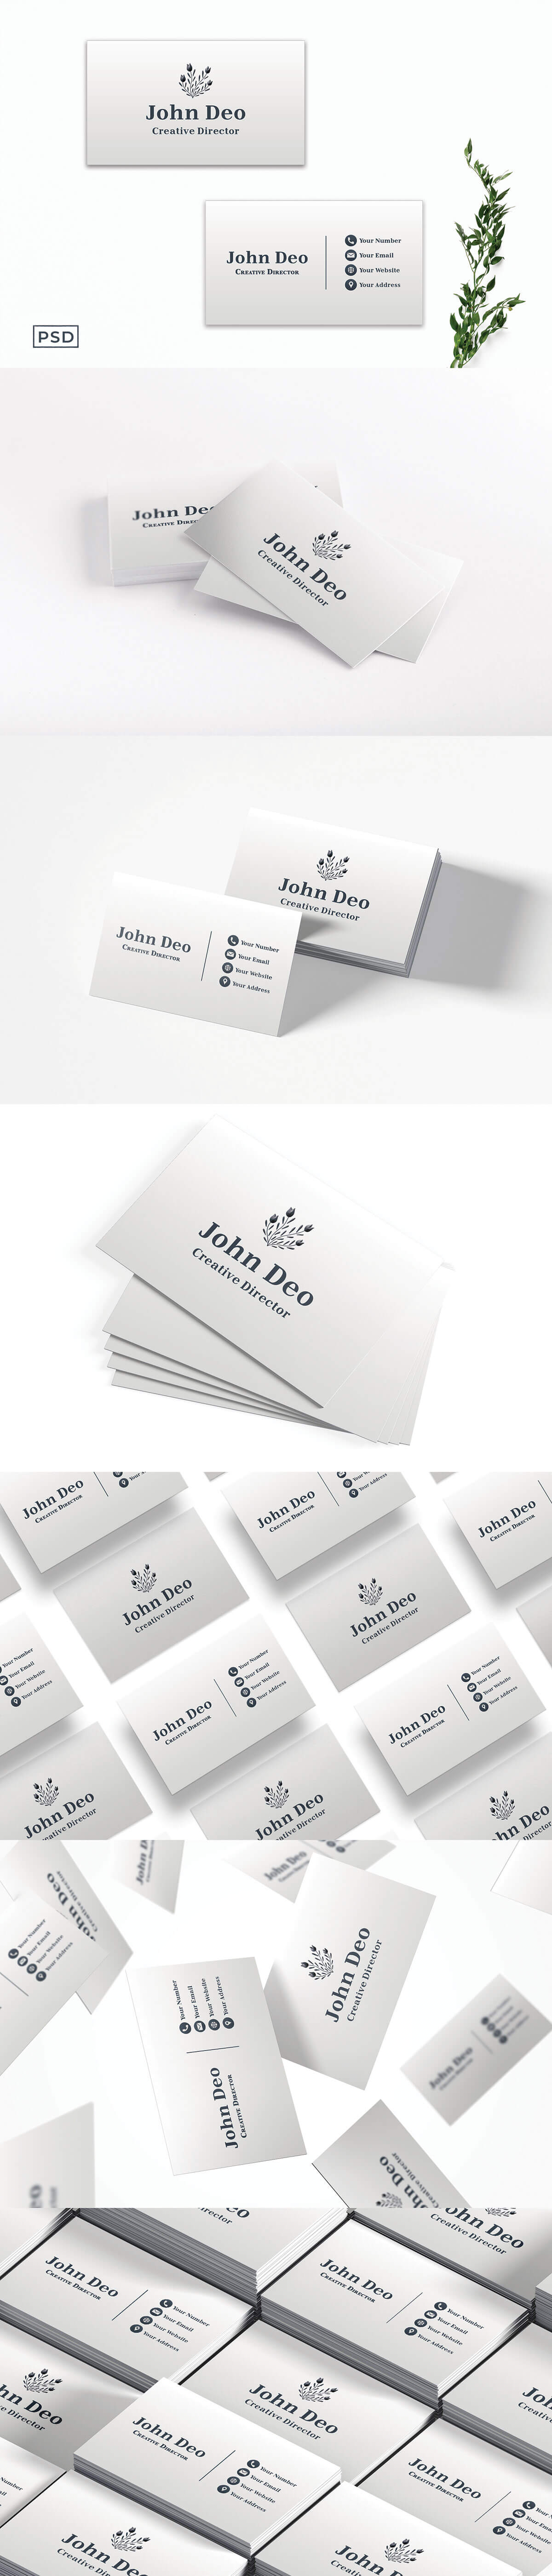 Free Creative Business Card Template V2